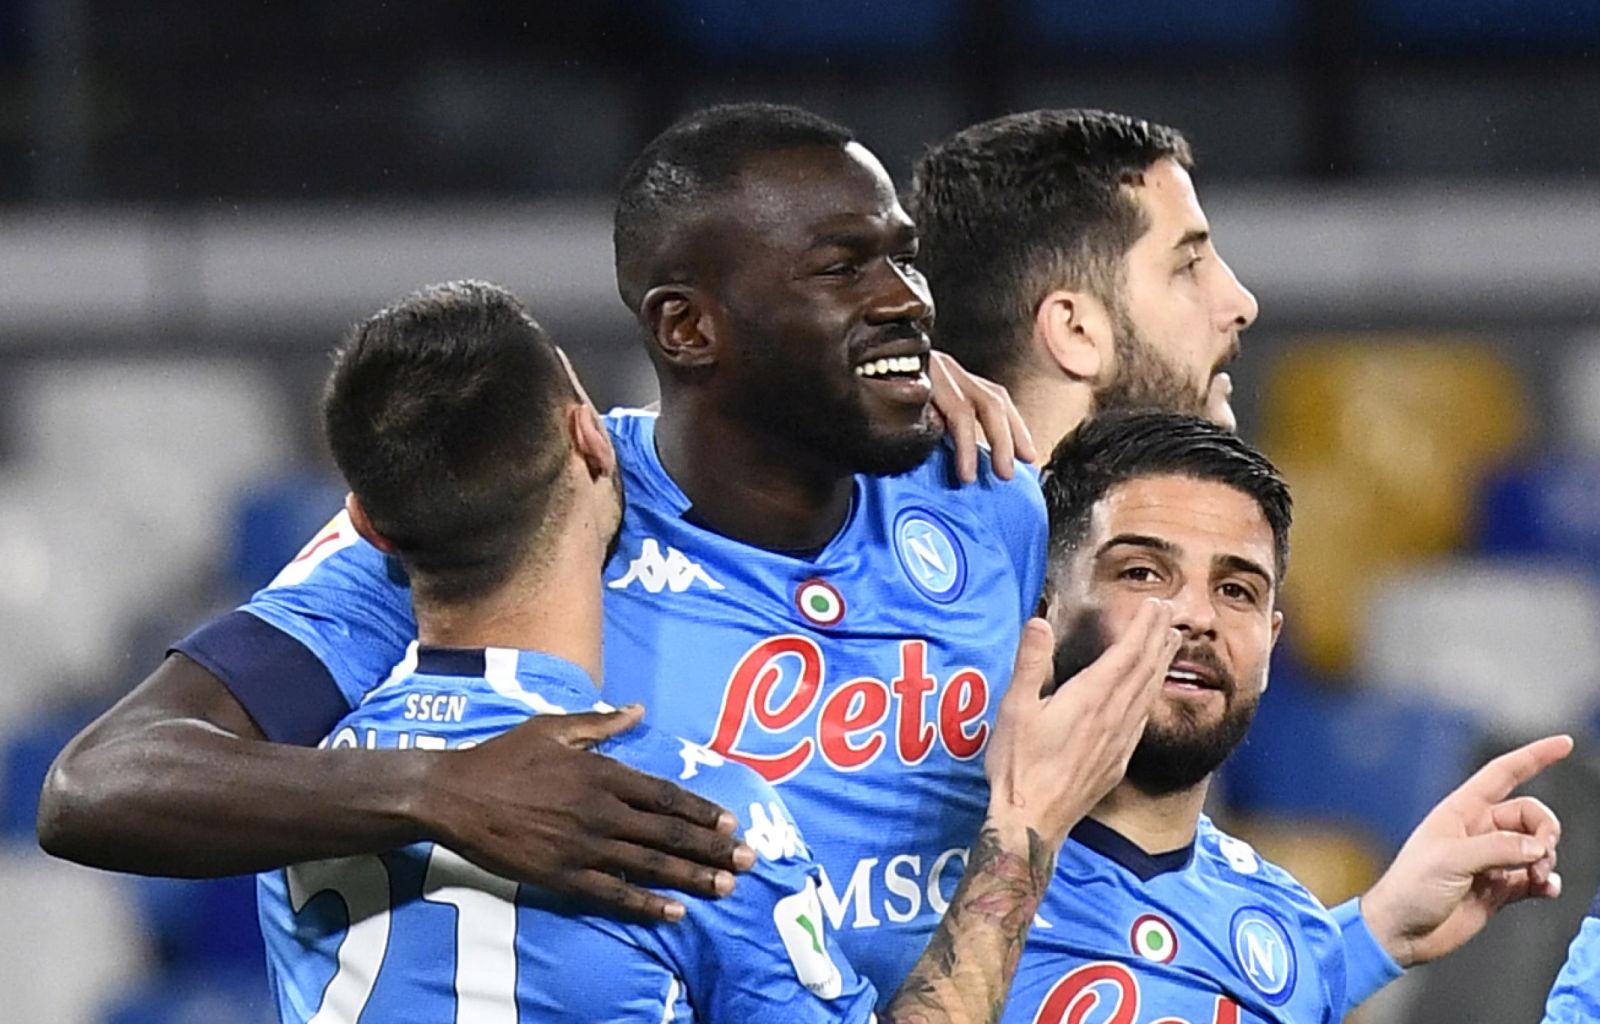 epa08971861 Napoli's defender Kalidou Koulibaly (2L) celebrates with his teammates after scoring the 1-0 lead during the Italian Cup quarter final soccer  match between SSC Napoli and  Spezia  at the Diego Armando Maradona stadium in Naples, Italy, 28 January 2021.  EPA/CIRO FUSCO